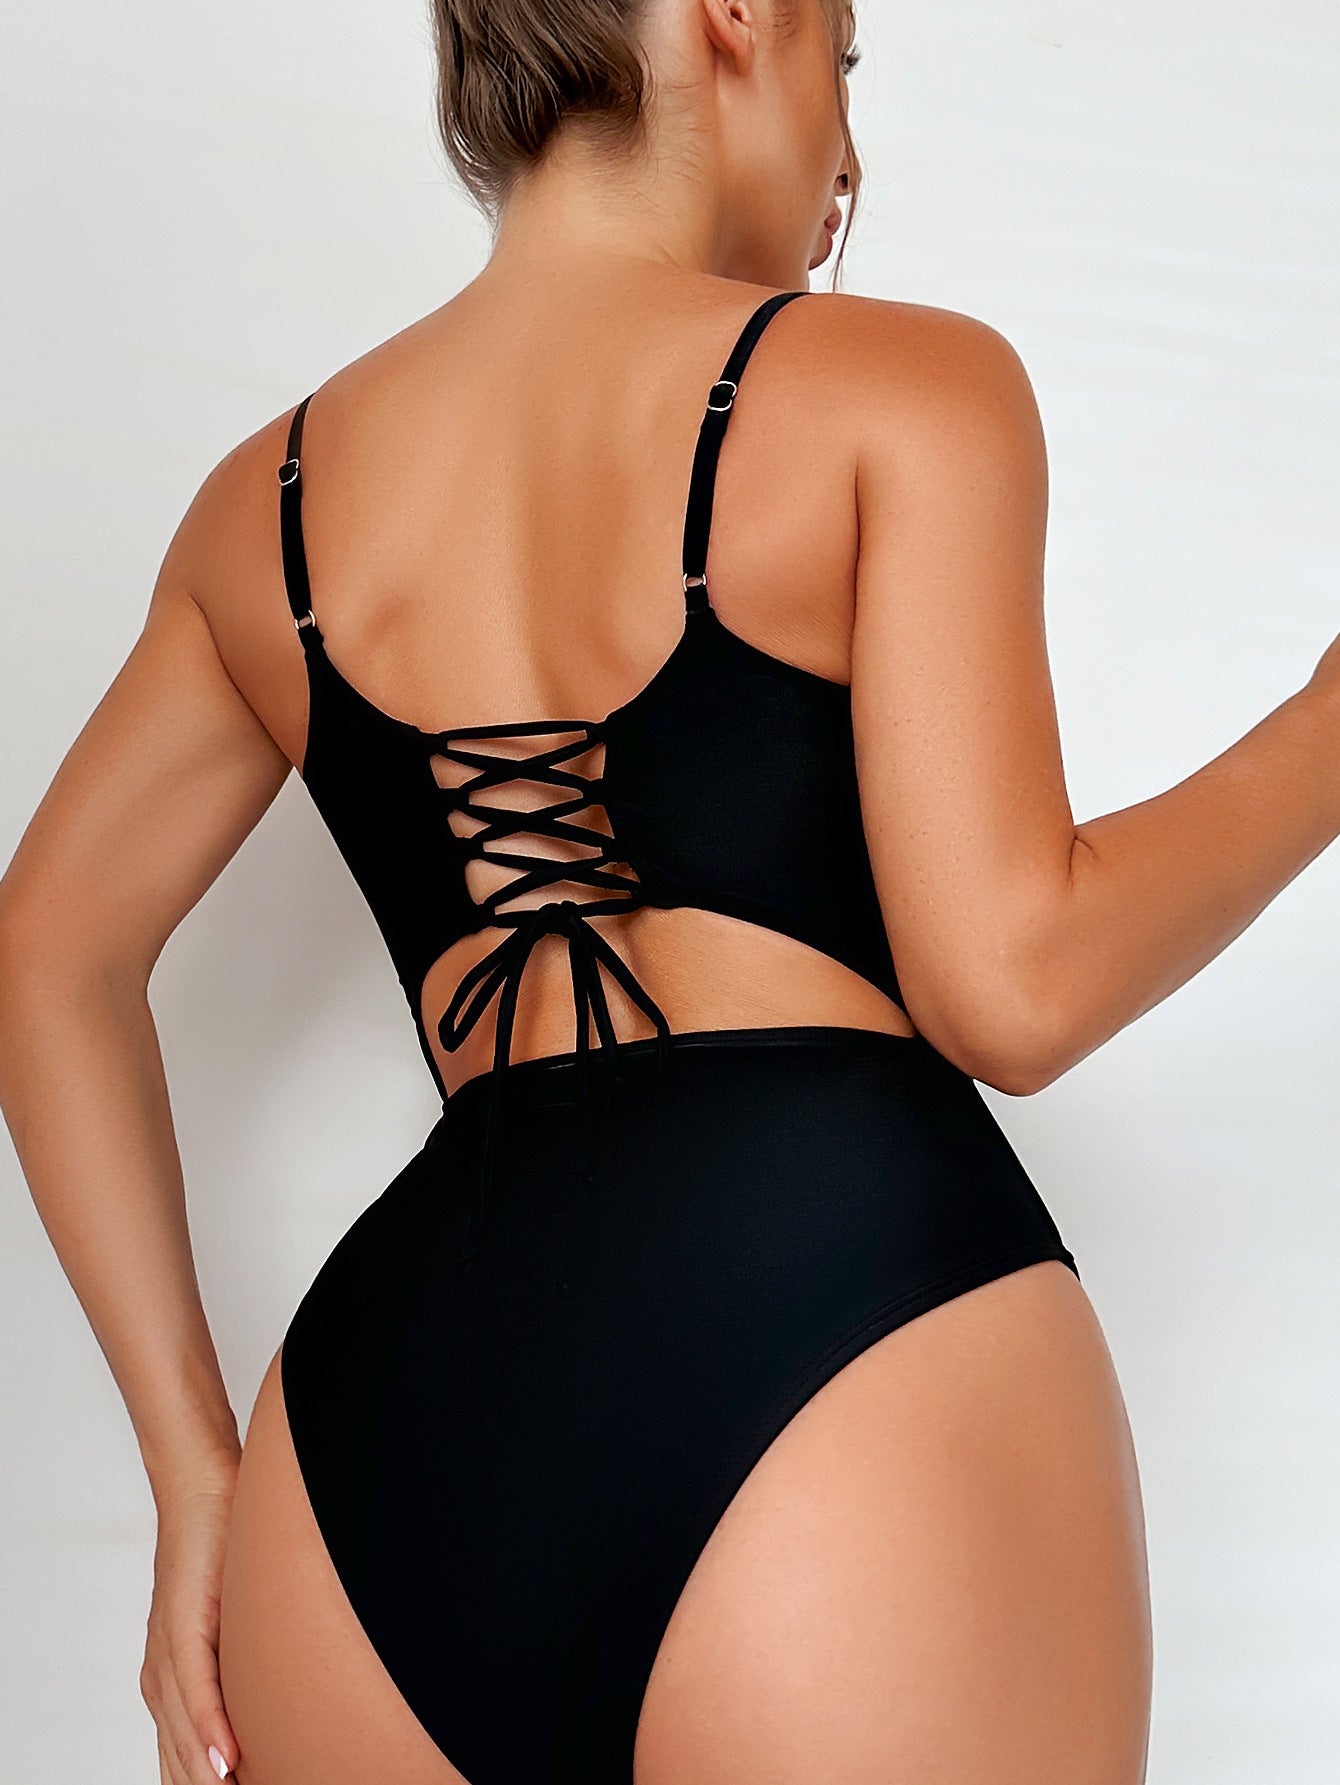 BamBam Solid Color Lace-Up Low Back One Piece Sexy Bikini Swimsuit - BamBam